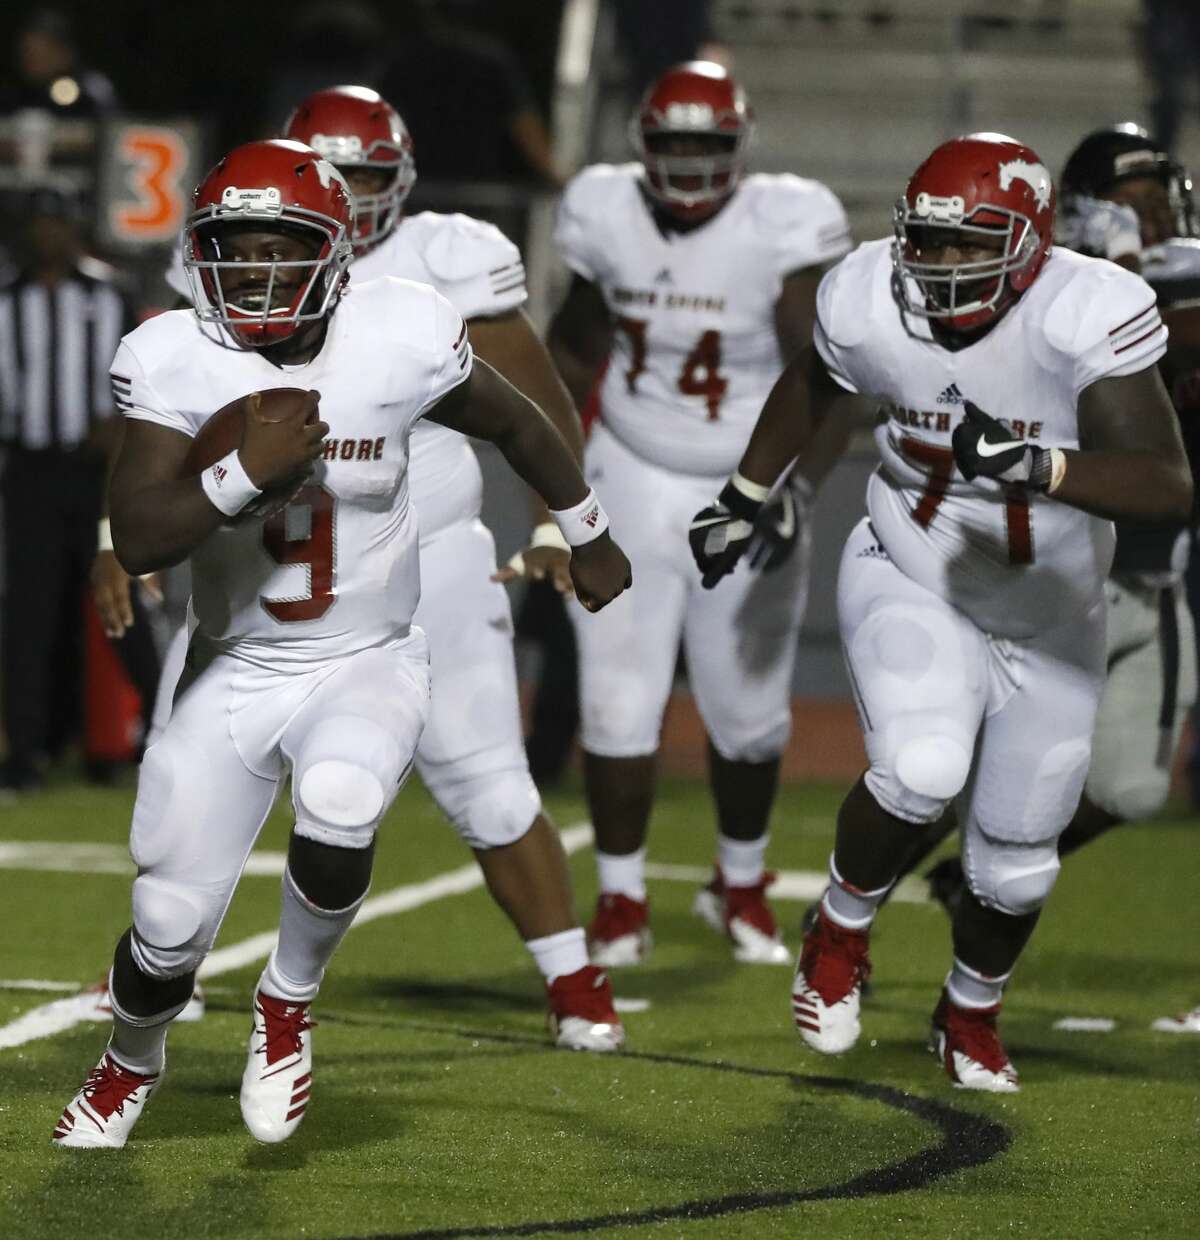 North Shore quarterback Dematrius Davis Jr. (9) runs the ball against Westfield during the second half of a high school football game at Geroge Stadium, Thursday,  September 13, 2018, in Spring.